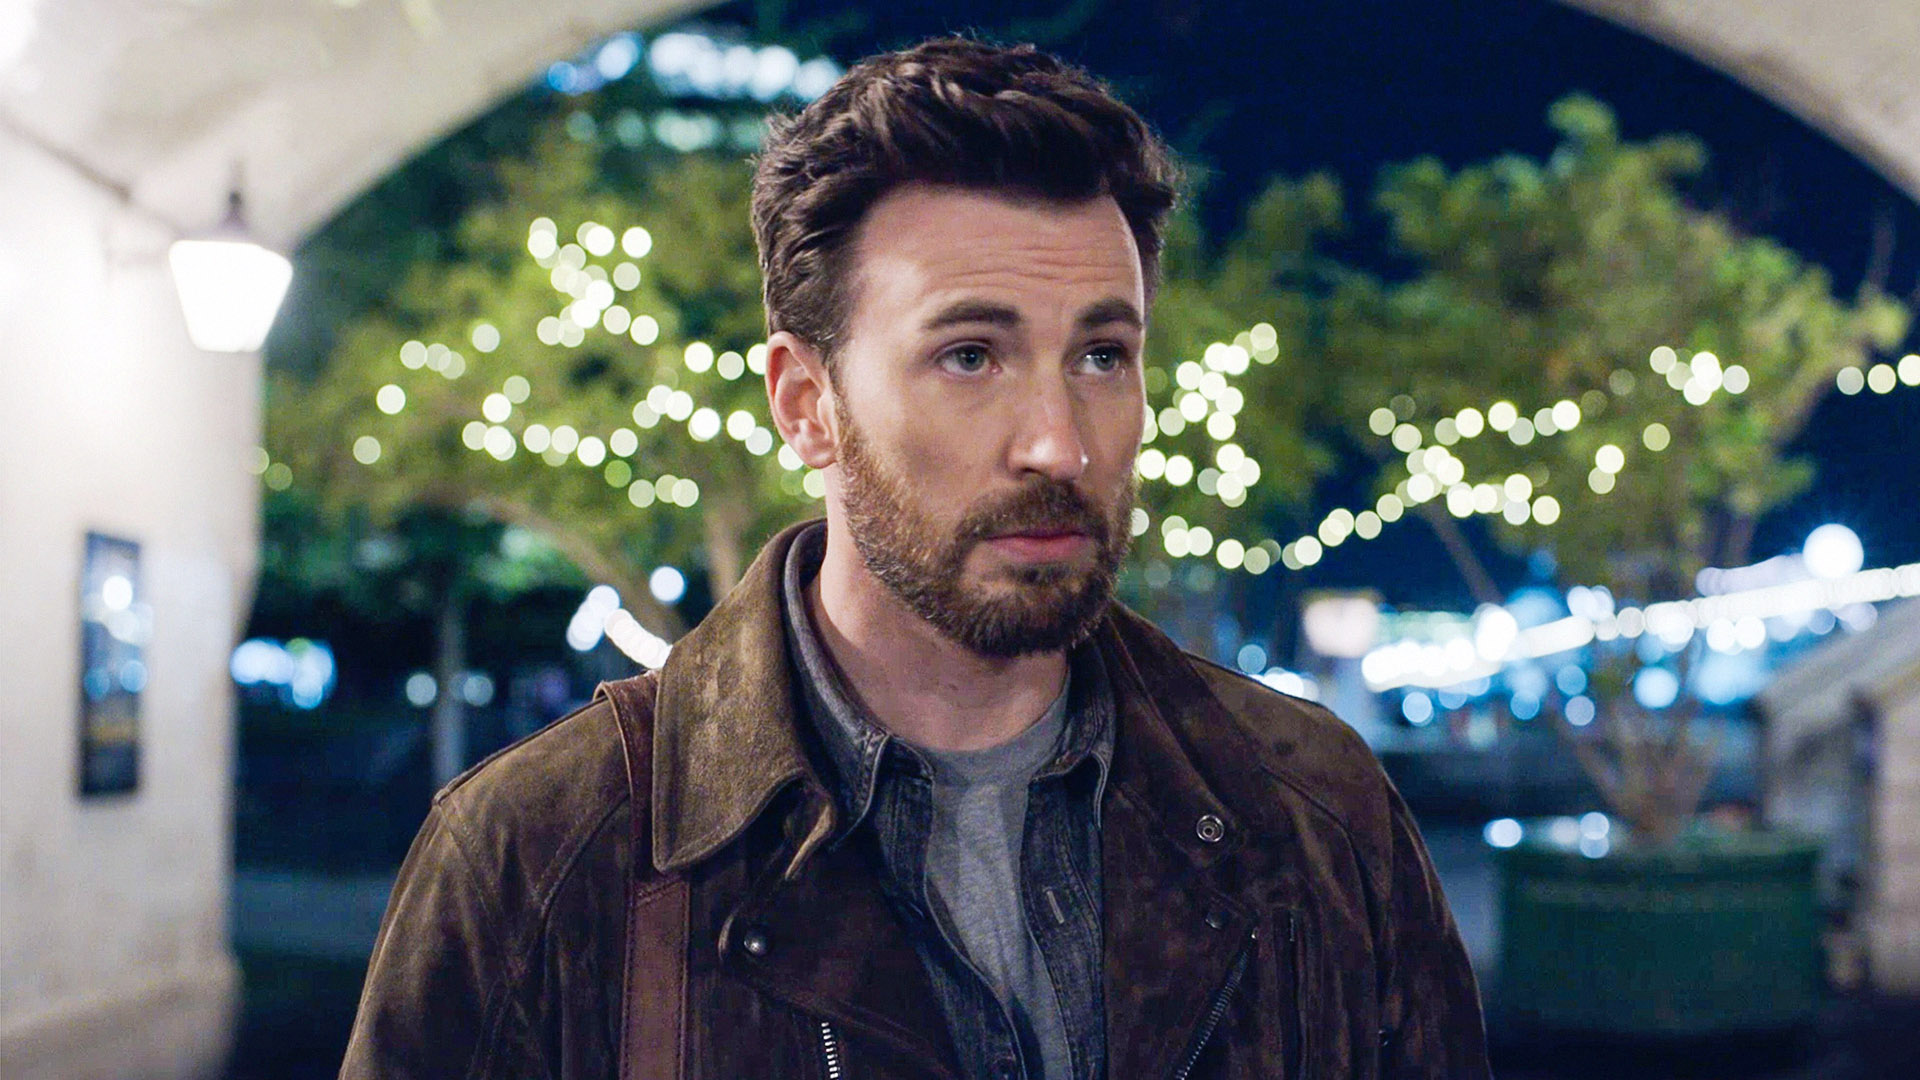 Chris Evans Never Been Ghosted, but Experienced Something 'Much Worse'